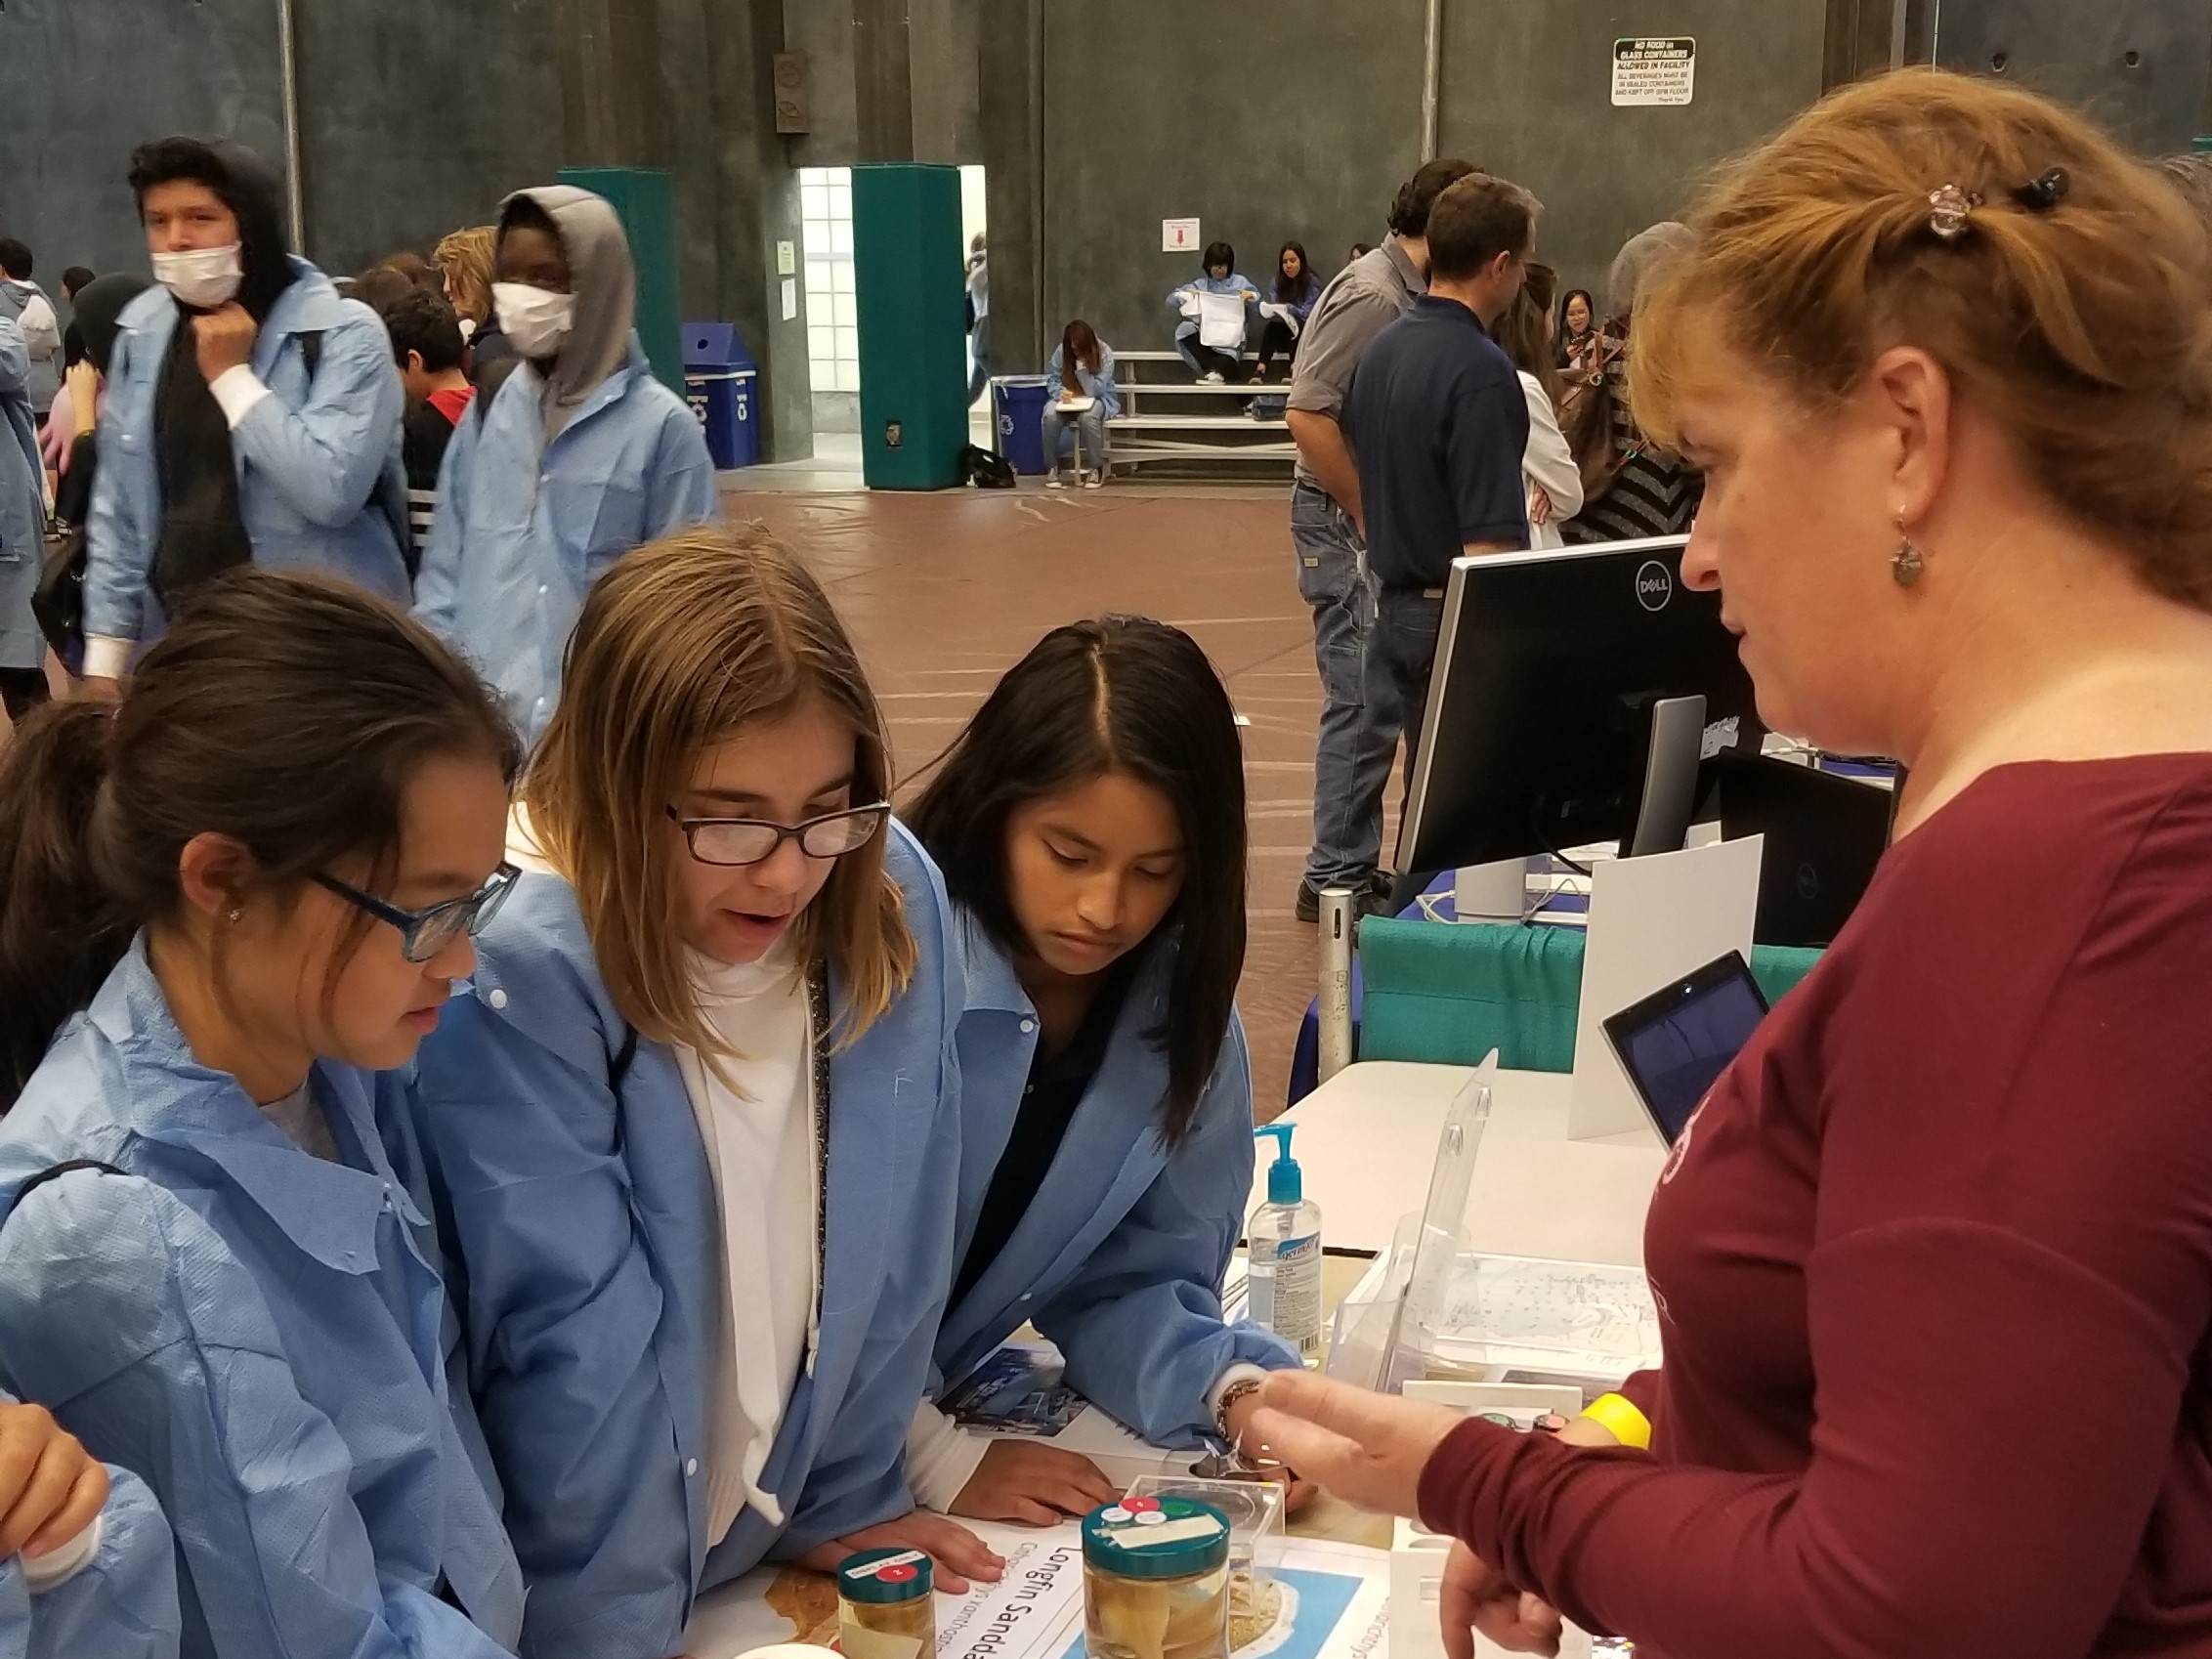 A marine biologist shows students examples of animals monitored as part of the City's Ocean Monitoring Program at a High Tech Fair.